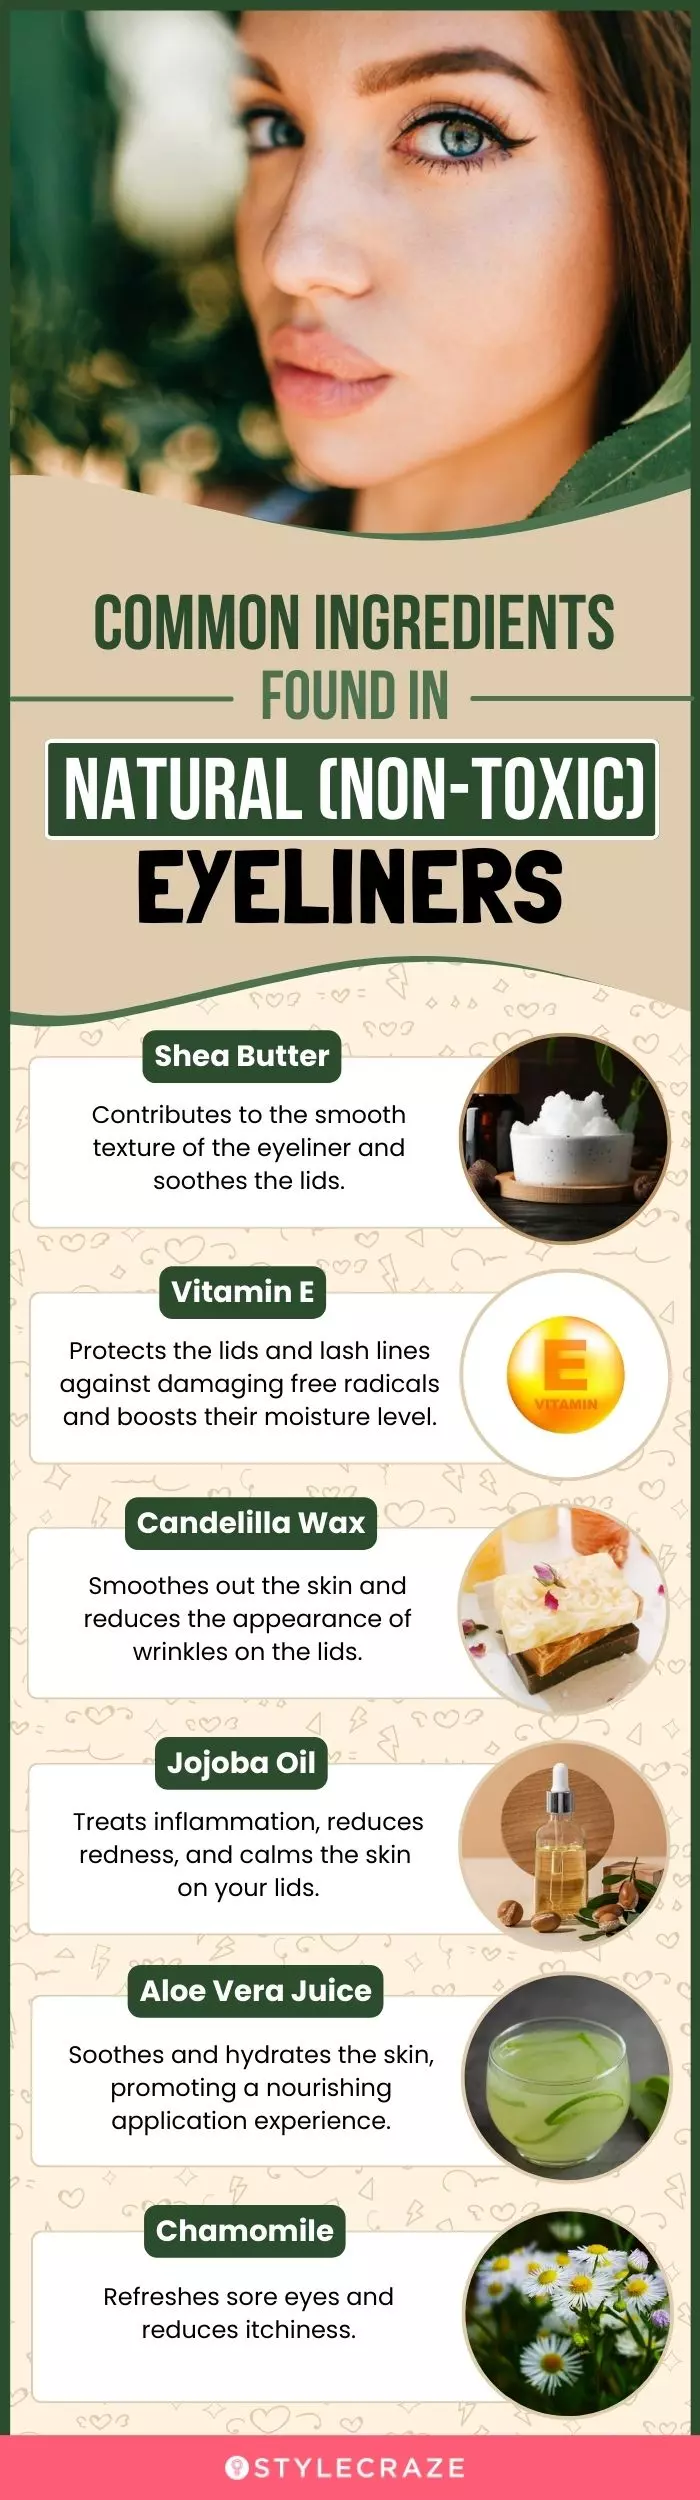 Common Ingredients Found In Natural (Non-Toxic) Eyeliners (infographic)